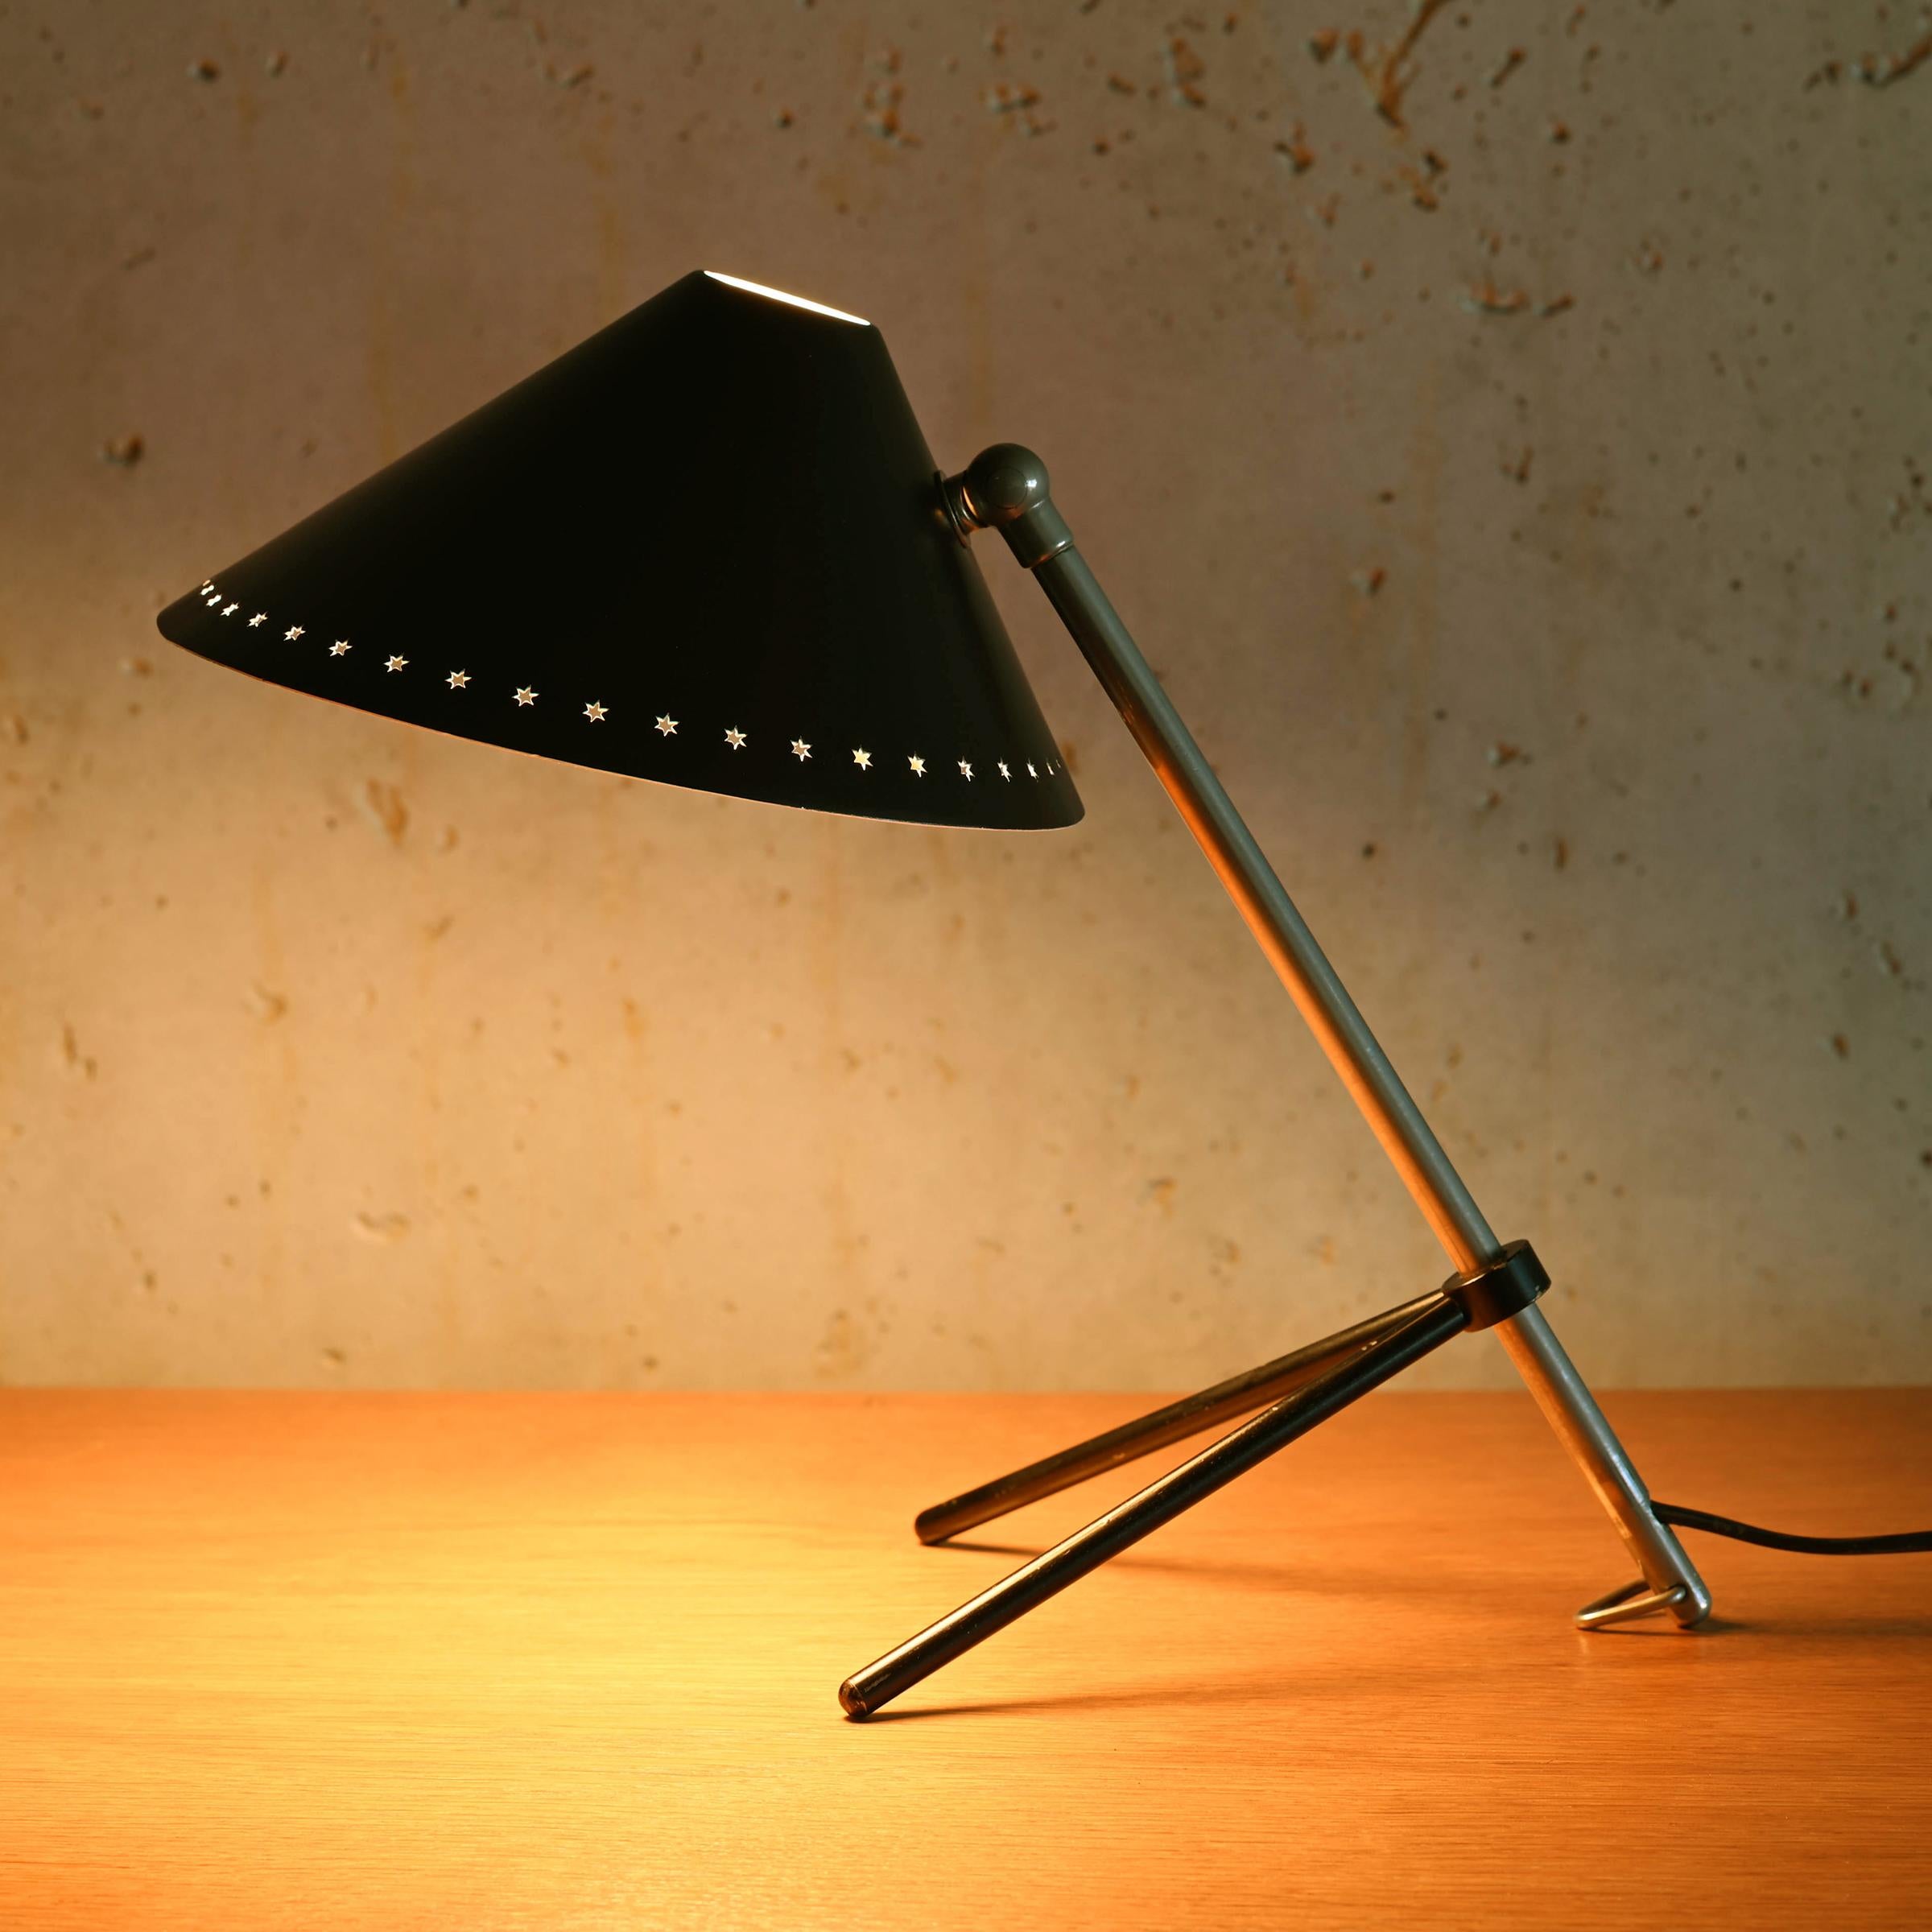 Mid-20th Century Pinocchio Lamp with black shade by H. Busquet for Hala Zeist, Netherlands For Sale